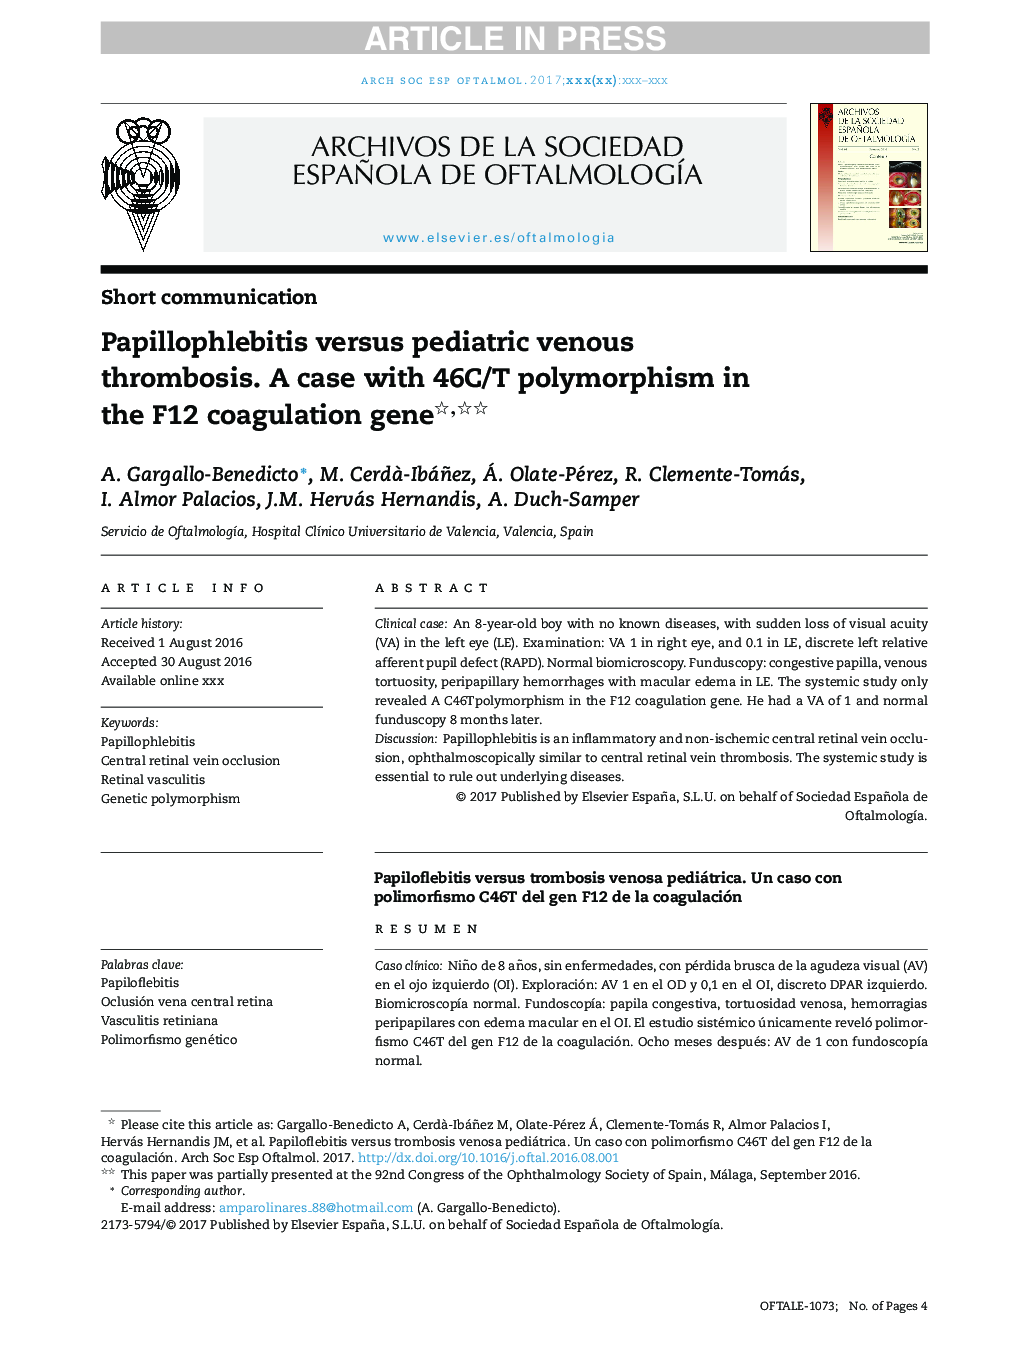 Papillophlebitis versus pediatric venous thrombosis. A case with 46C/T polymorphism in the F12 coagulation gene